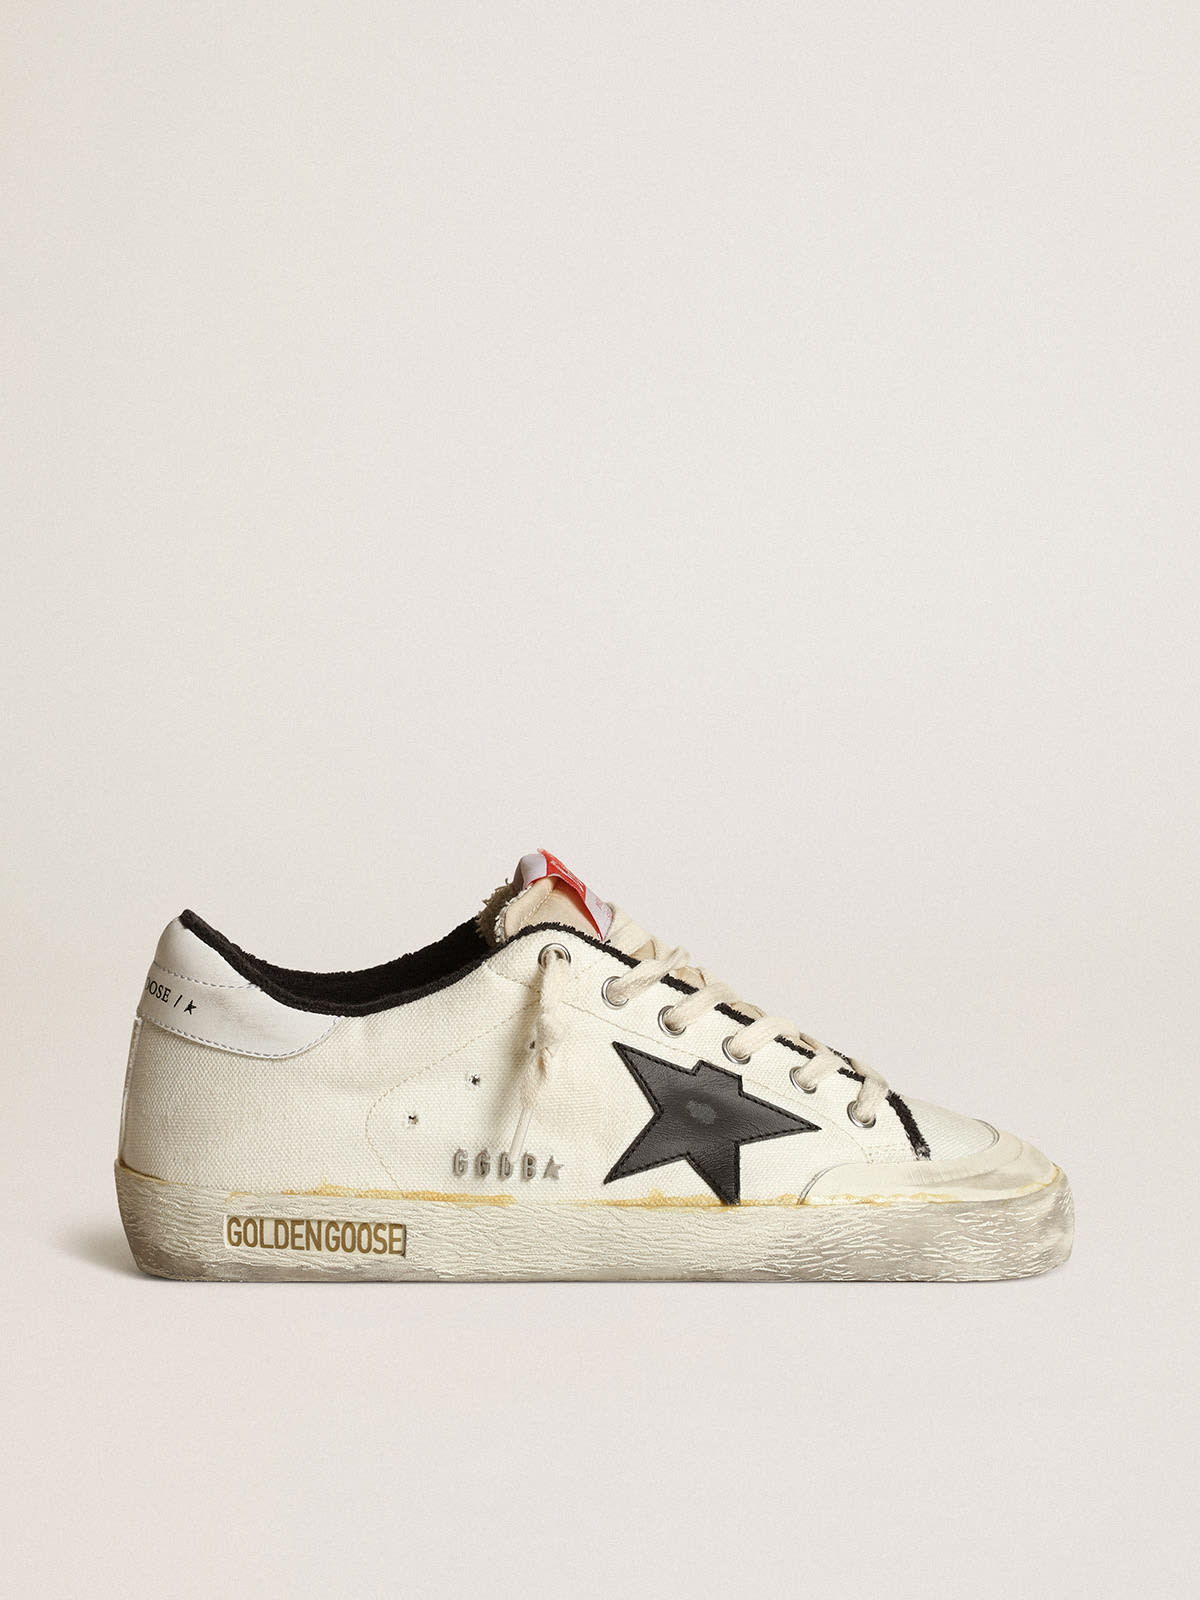 golden goose in canvas beige and Super-Star LTD black with leather tab Women’s sneakers star white heel